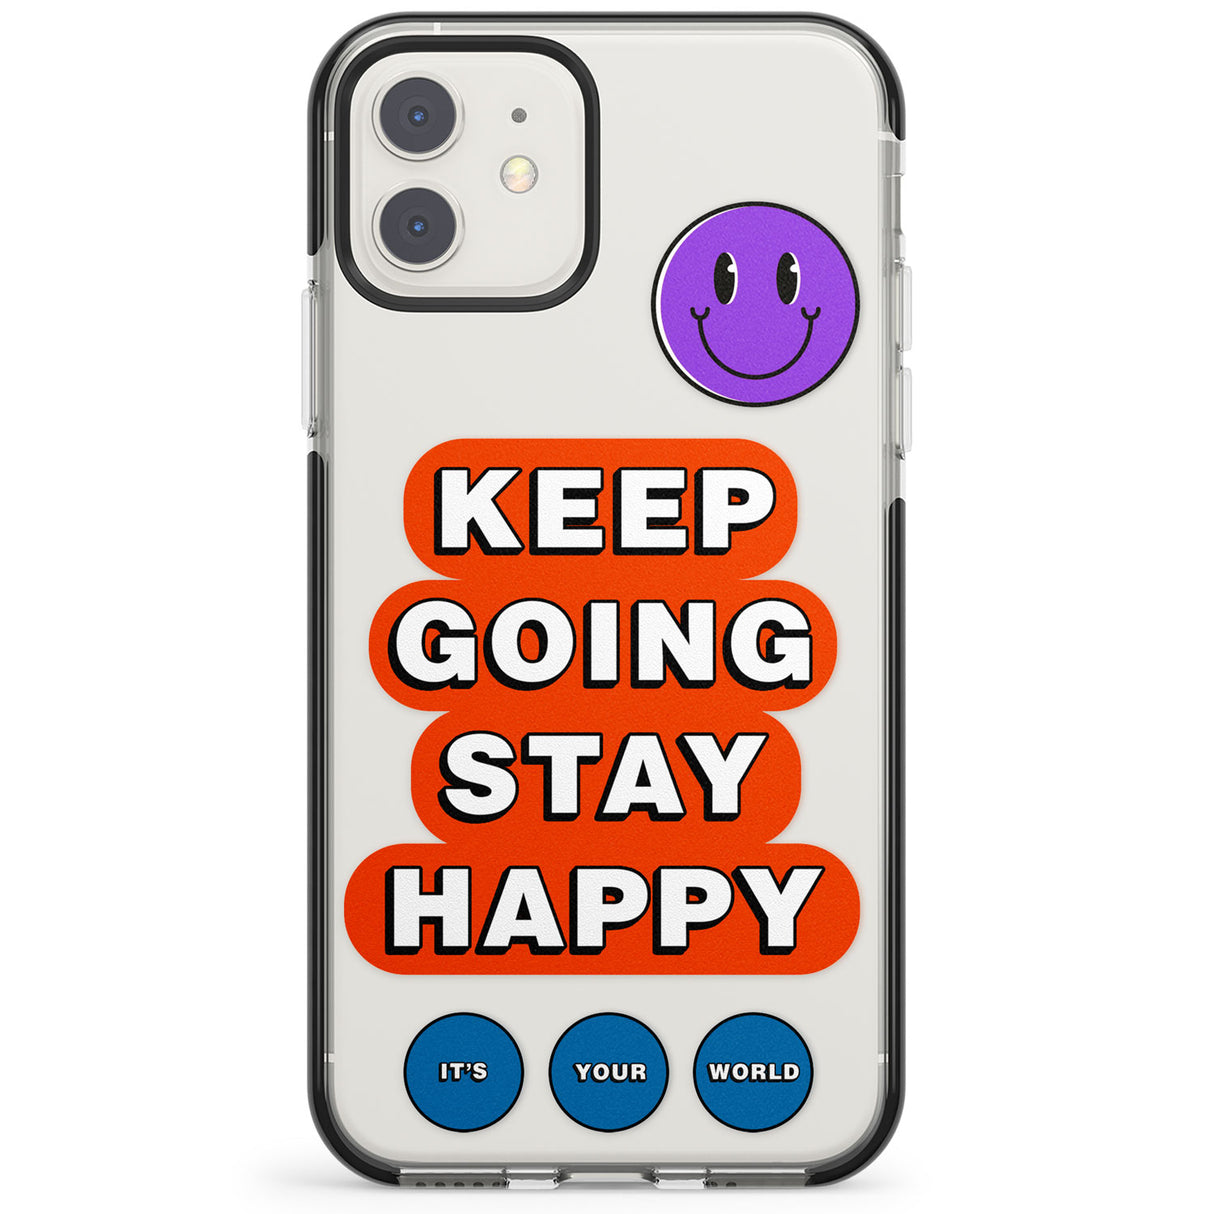 Keep Going Stay Happy Impact Phone Case for iPhone 11, iphone 12